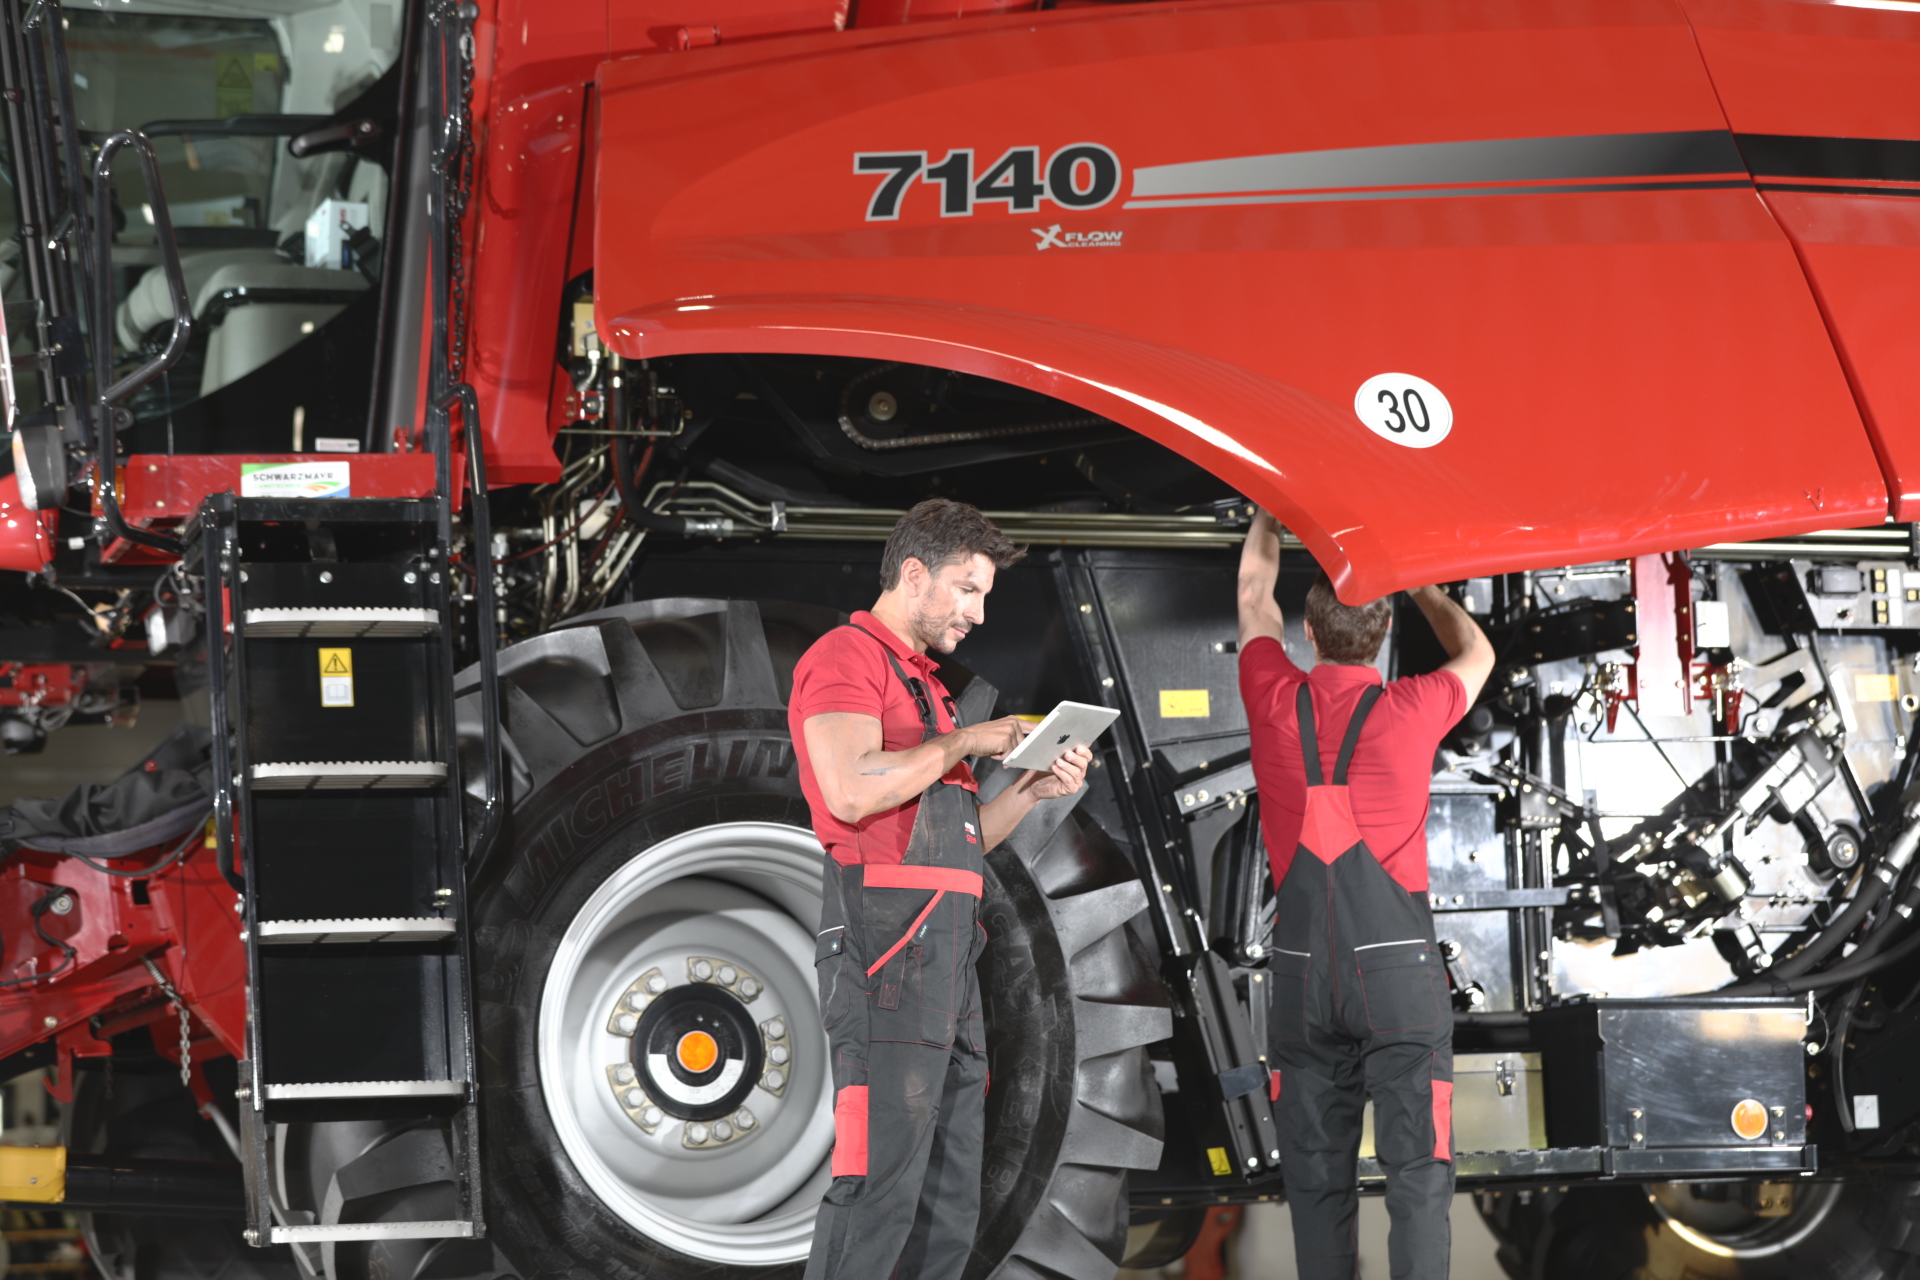 Service packages from Case IH to maximise uptime in the field